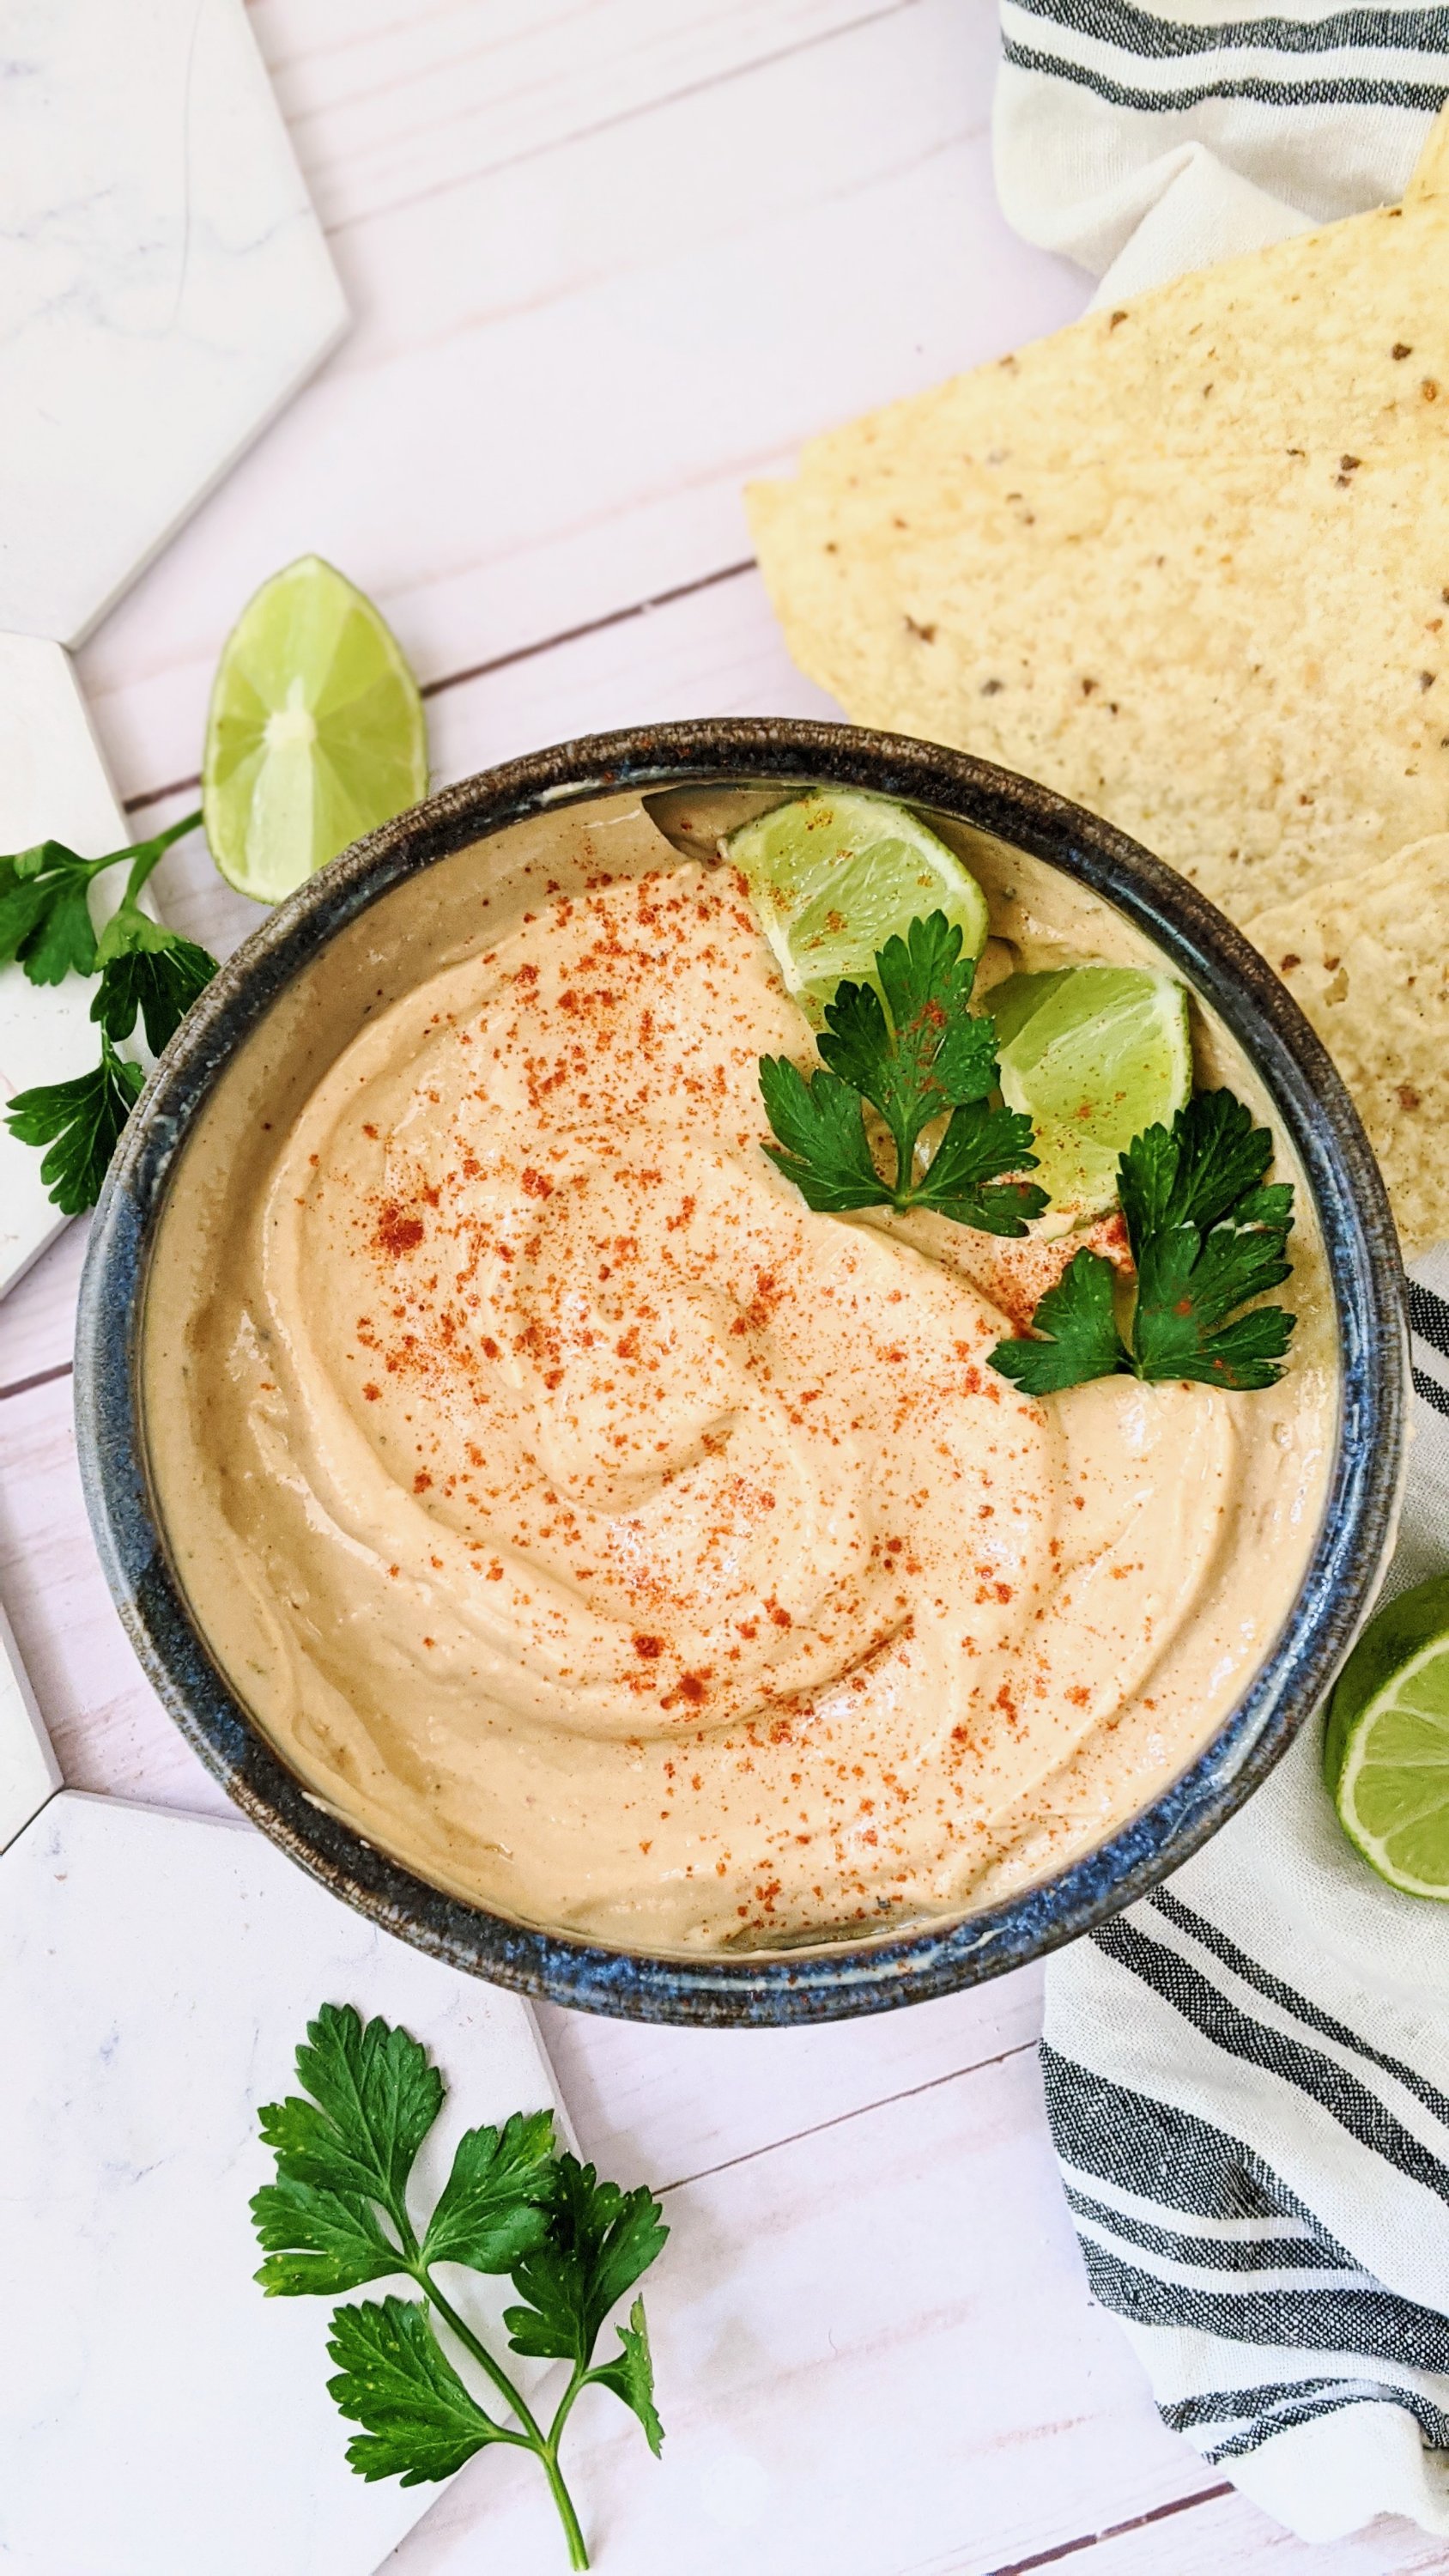 nut free vegan queso with tofu recipe dairy free cheese sauce silken tofu party dips healthy homemade blender dip for nacho chips vegan mexican cheese sauce dairy free no cheese queso nut free recipe